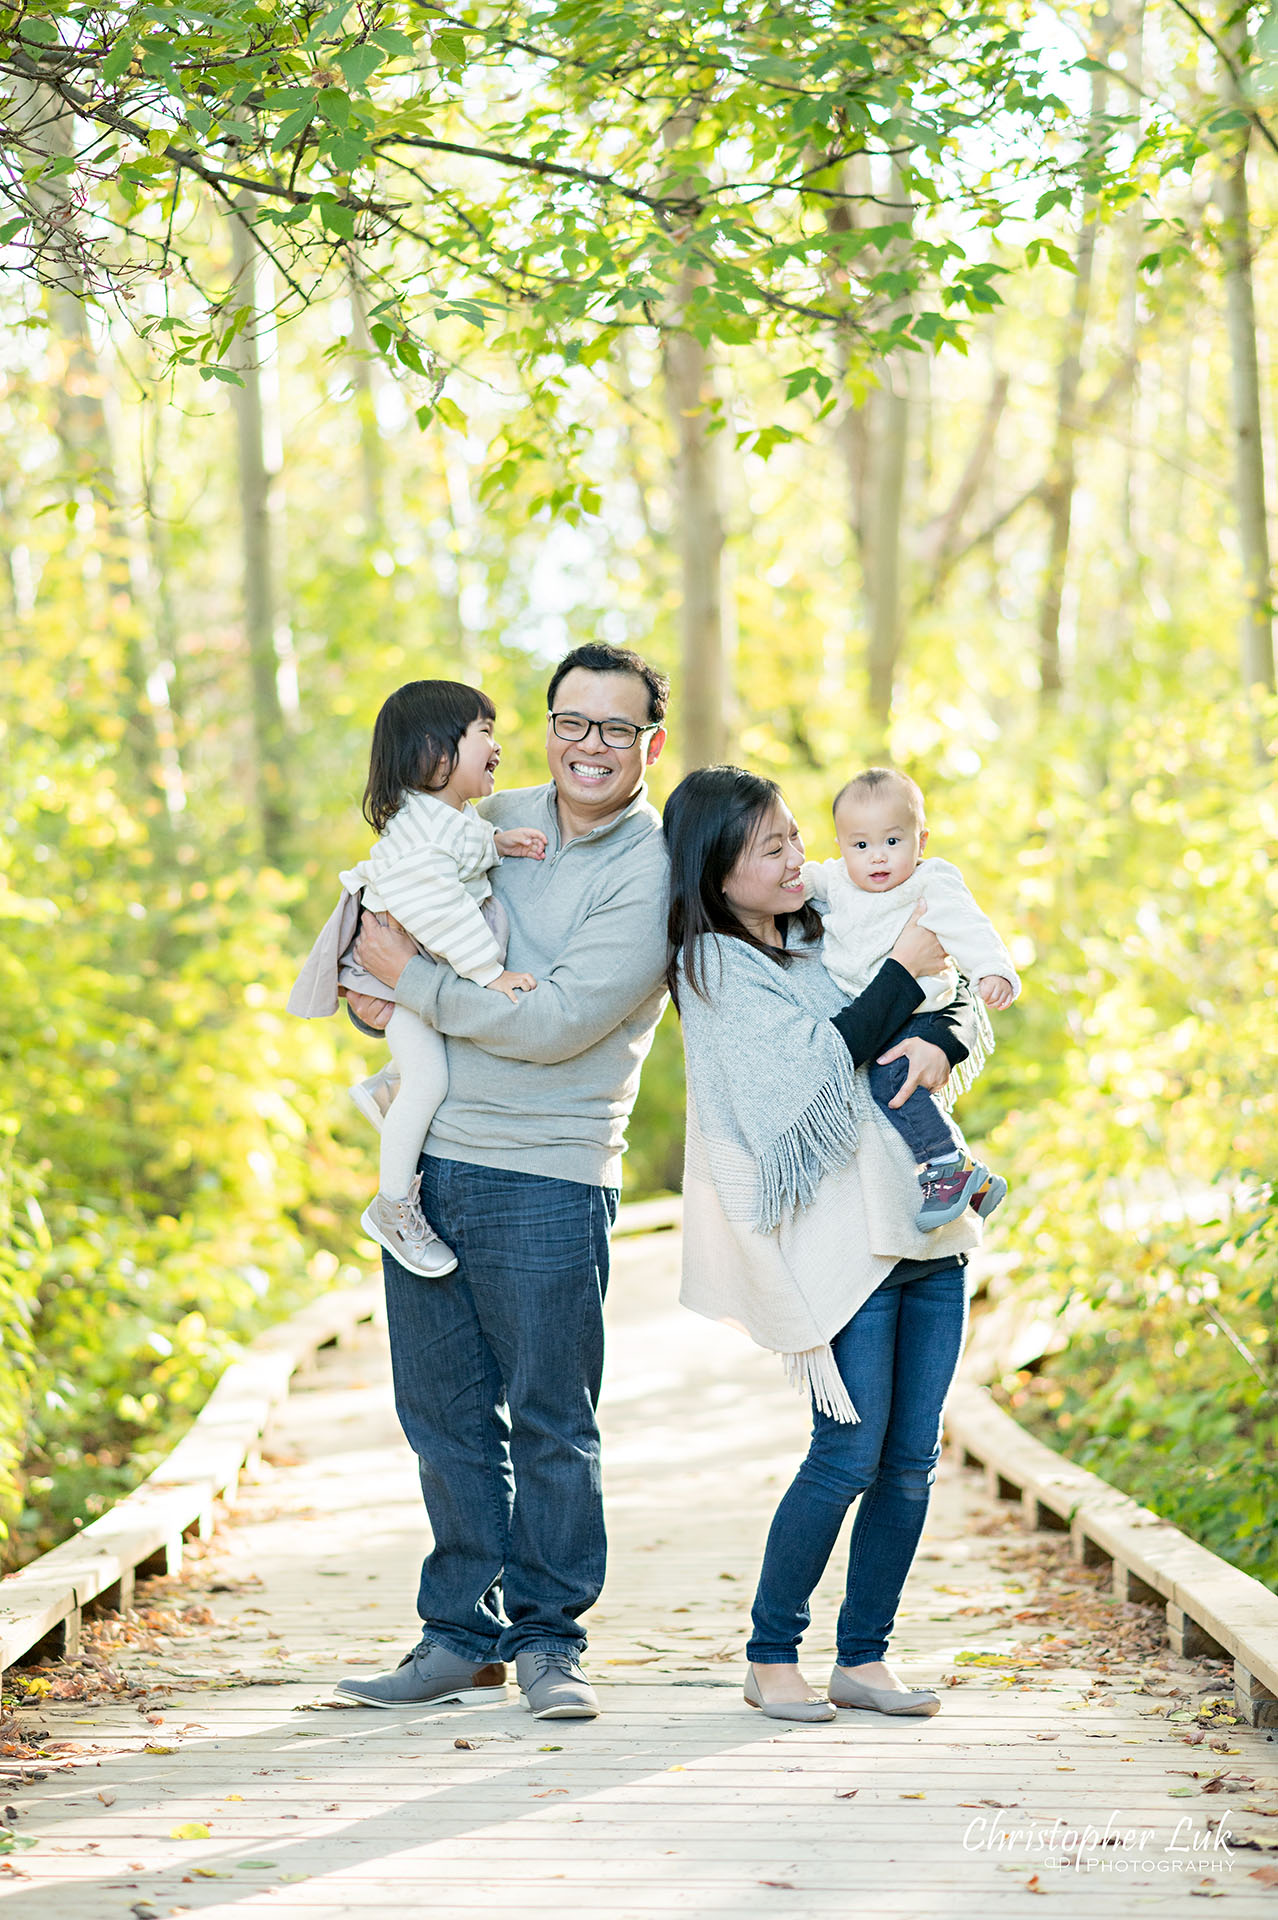 Christopher Luk Markham Family Photographer Autumn Leaves Fall Season Candid Photojournalistic Natural Bright Timeless Mother Father Son Daughter Smiling Laughing Portrait 